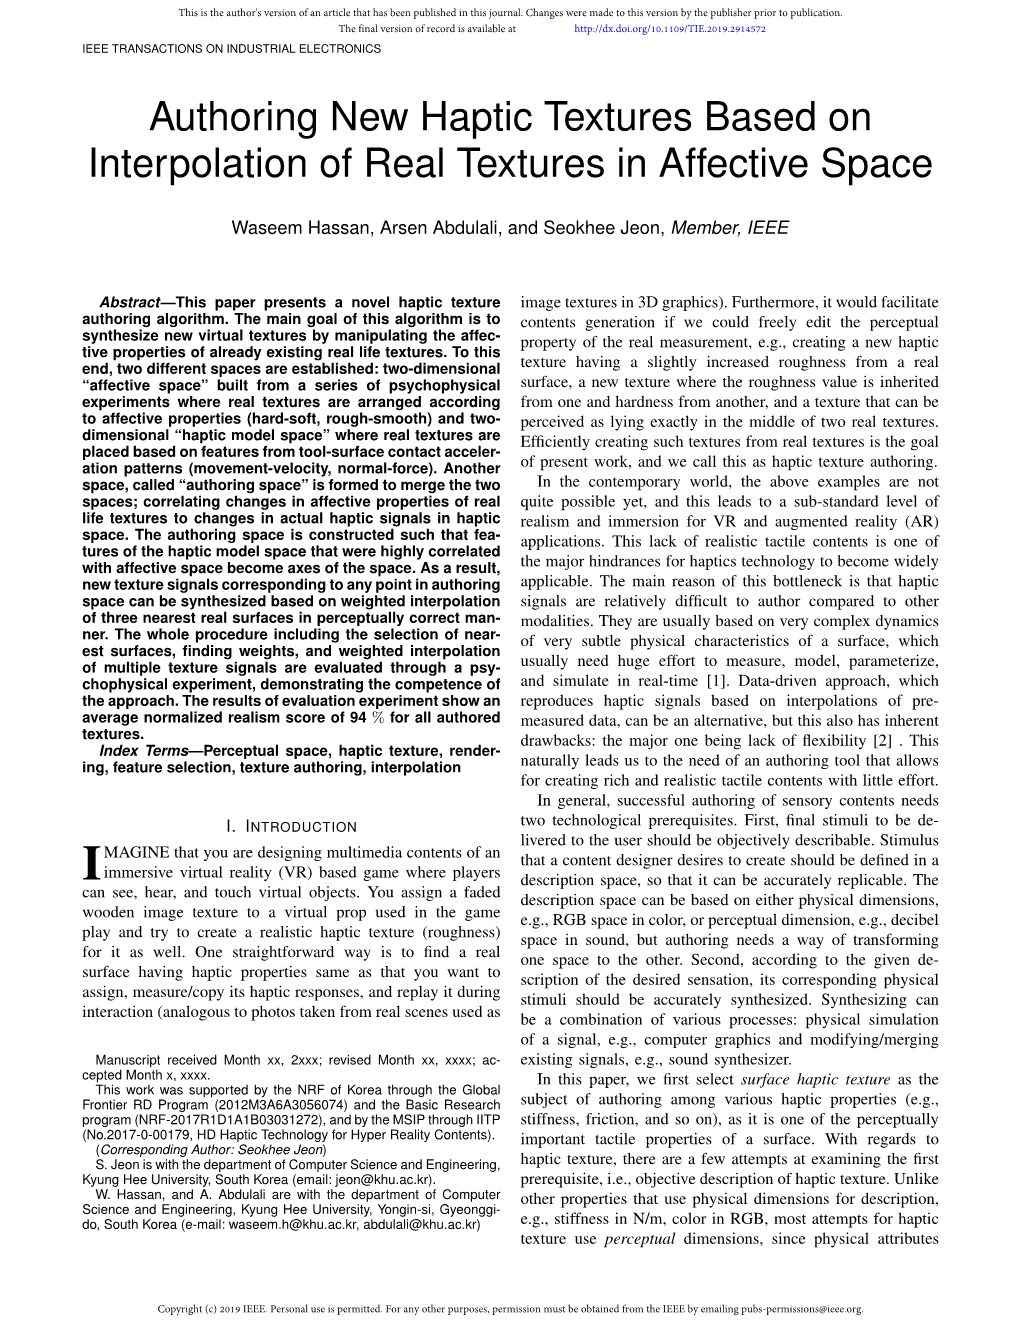 Authoring New Haptic Textures Based on Interpolation of Real Textures in Affective Space